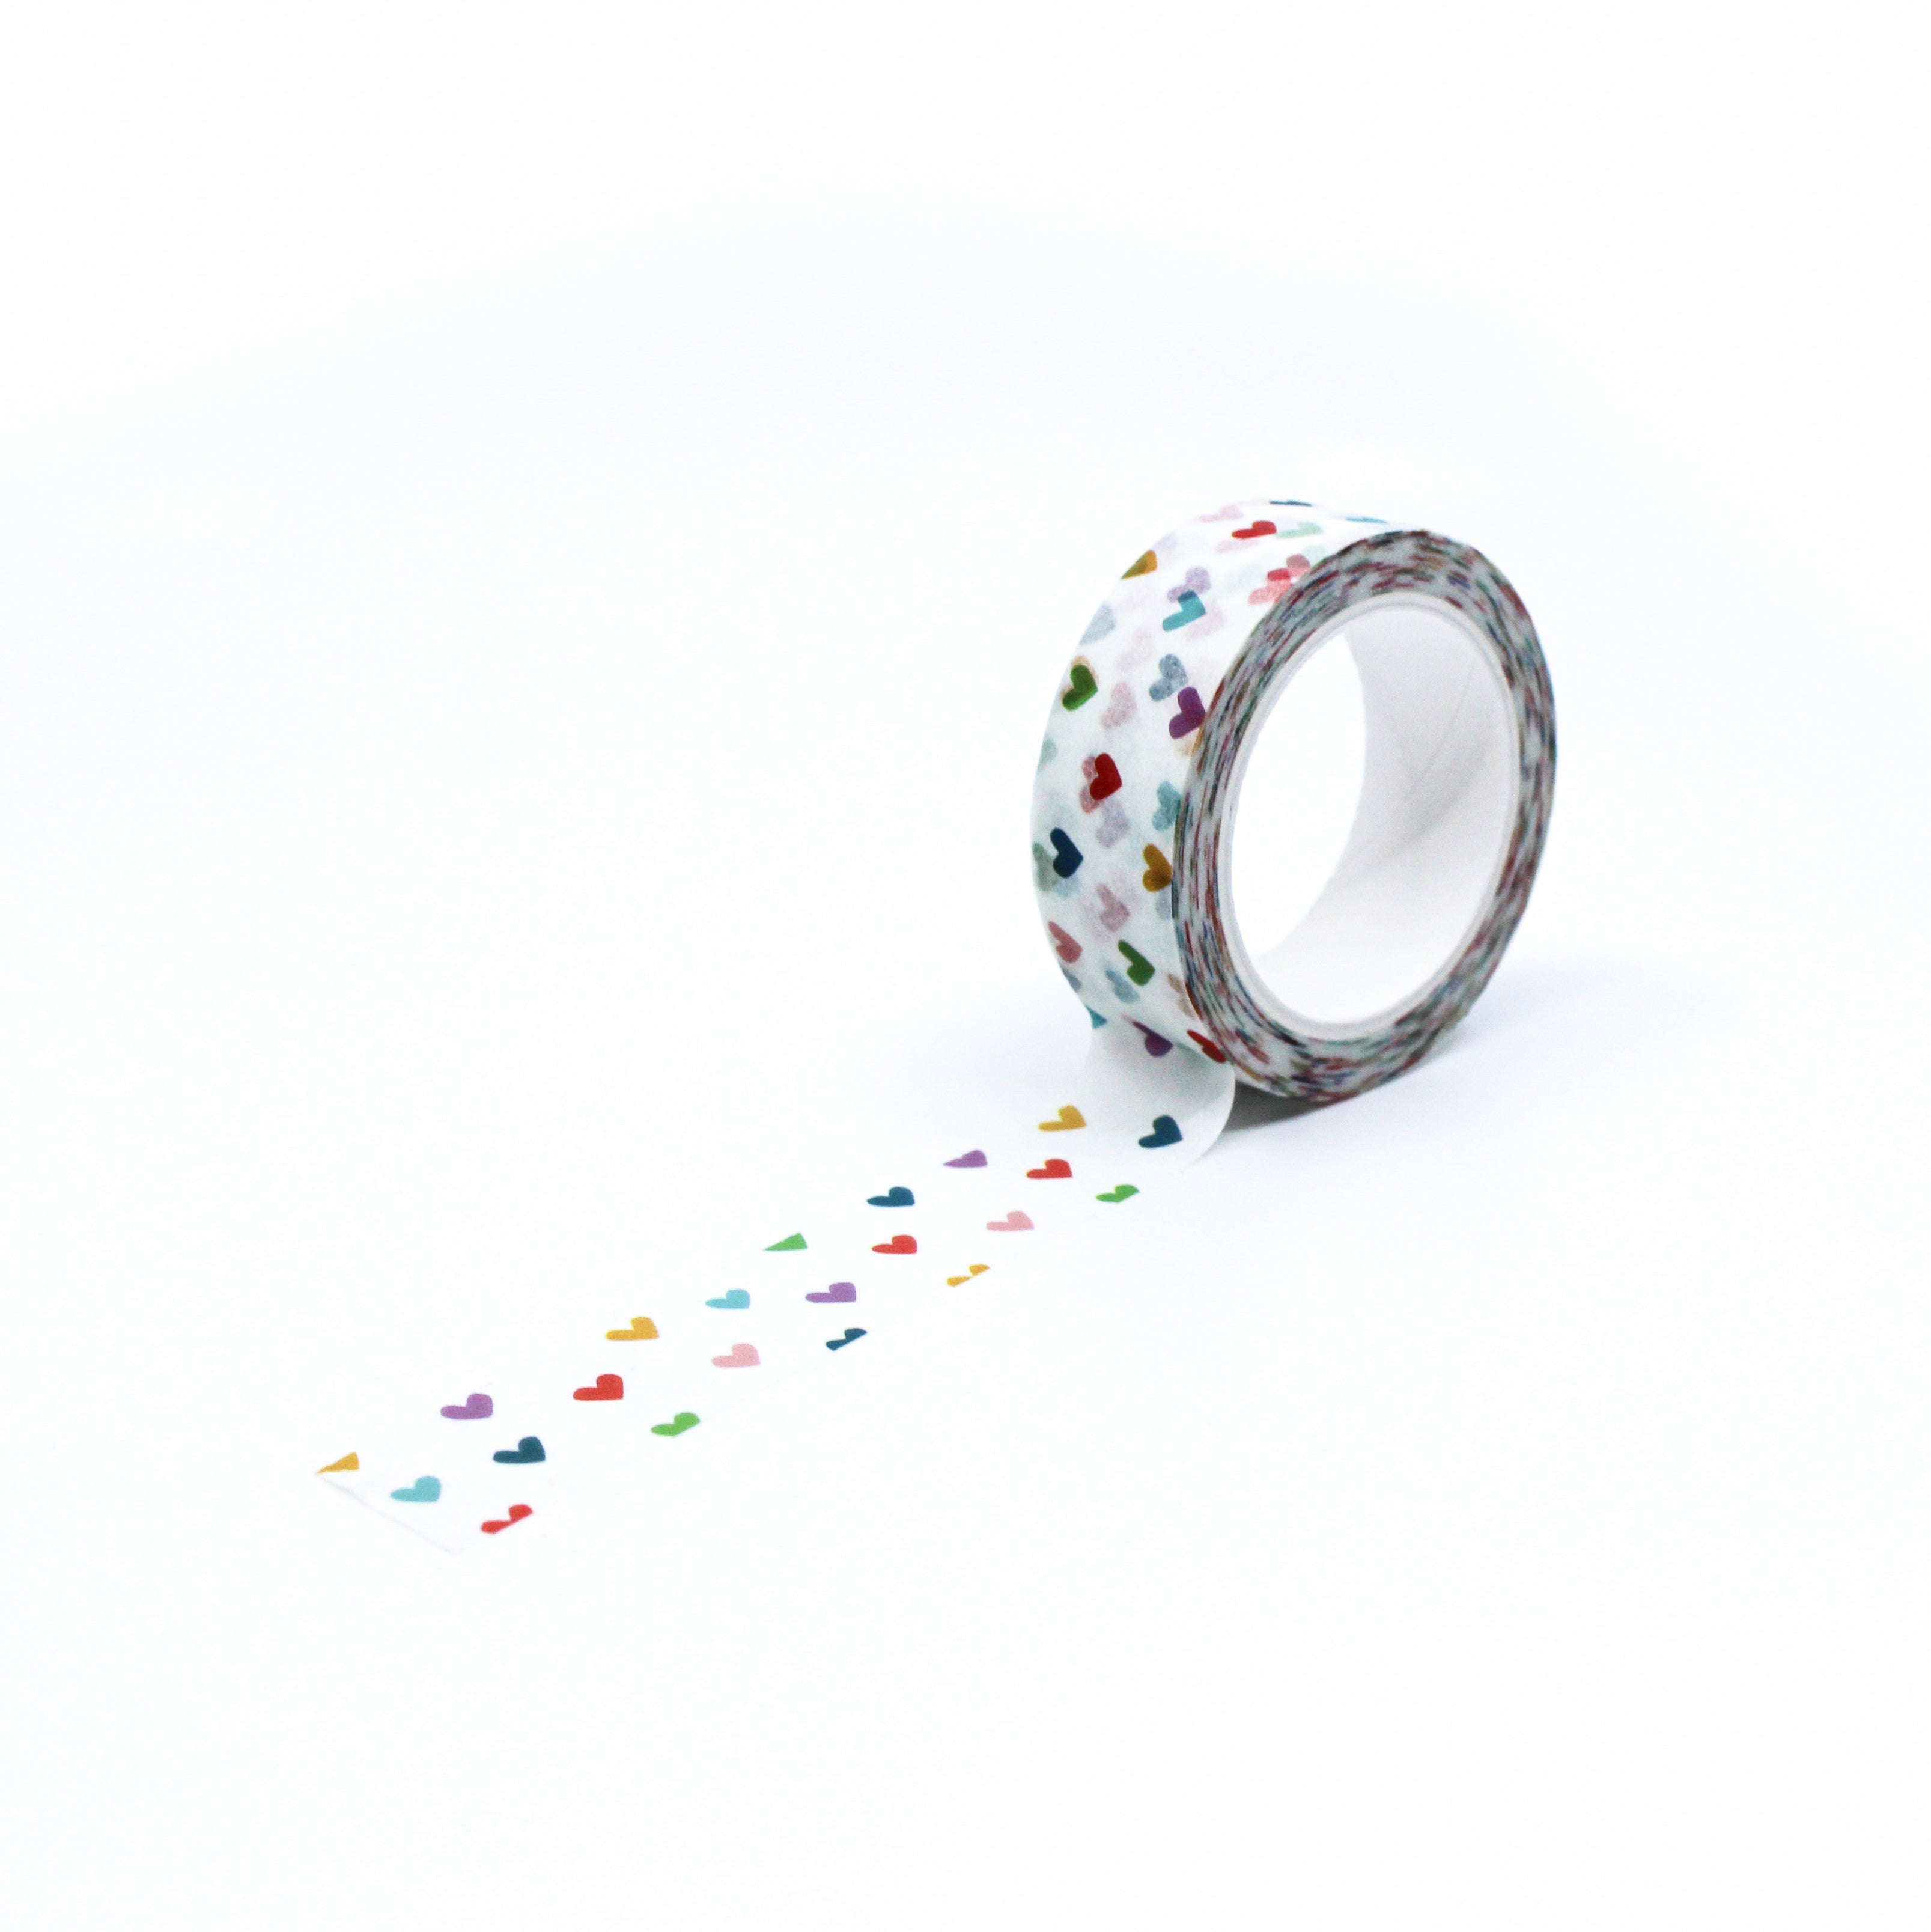 This is full pattern repeat of our fun and colorful tiny rainbow hearts washi tape from BBB Supplies craft and journaling shop.